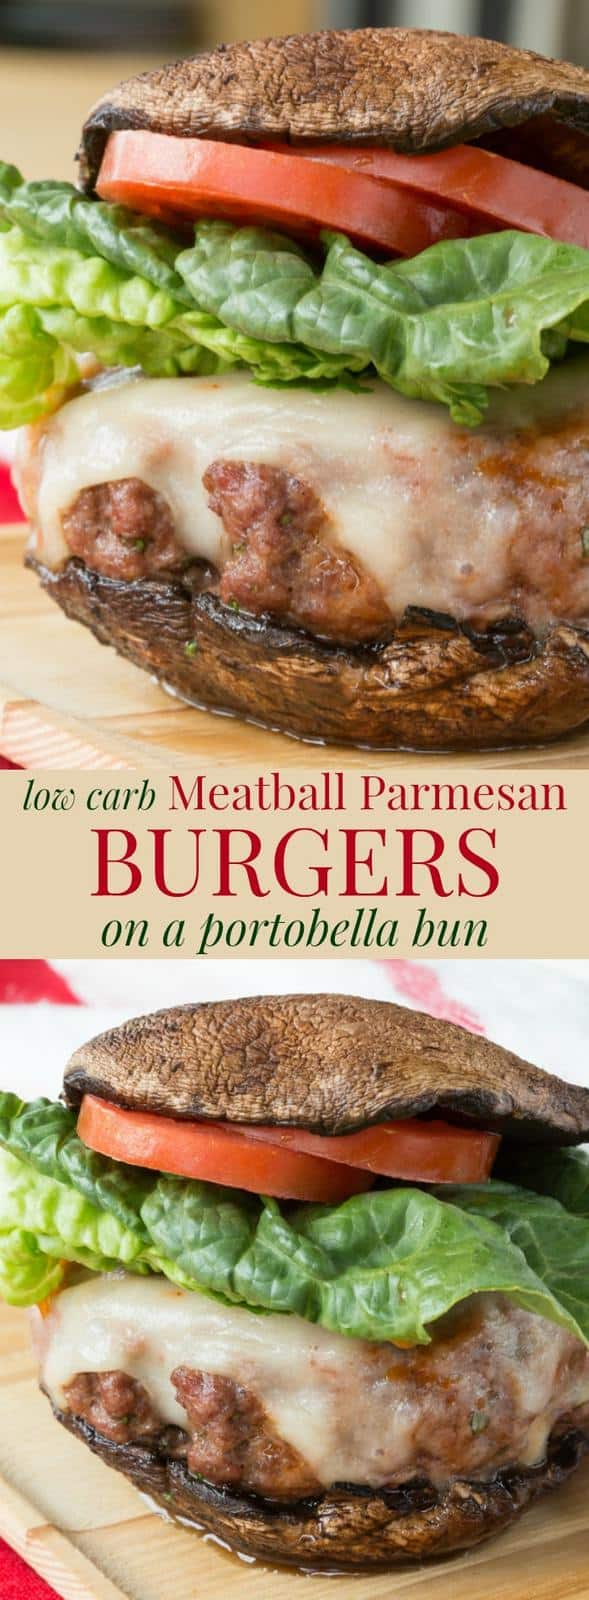 Meatball Parmesan Burgers - transform the classic Italian comfort food recipe into a juicy hamburger topped with tomato sauce and cheese on a portobella mushroom "bun" to make them low carb and gluten free. | cupcakesandkalechips.com